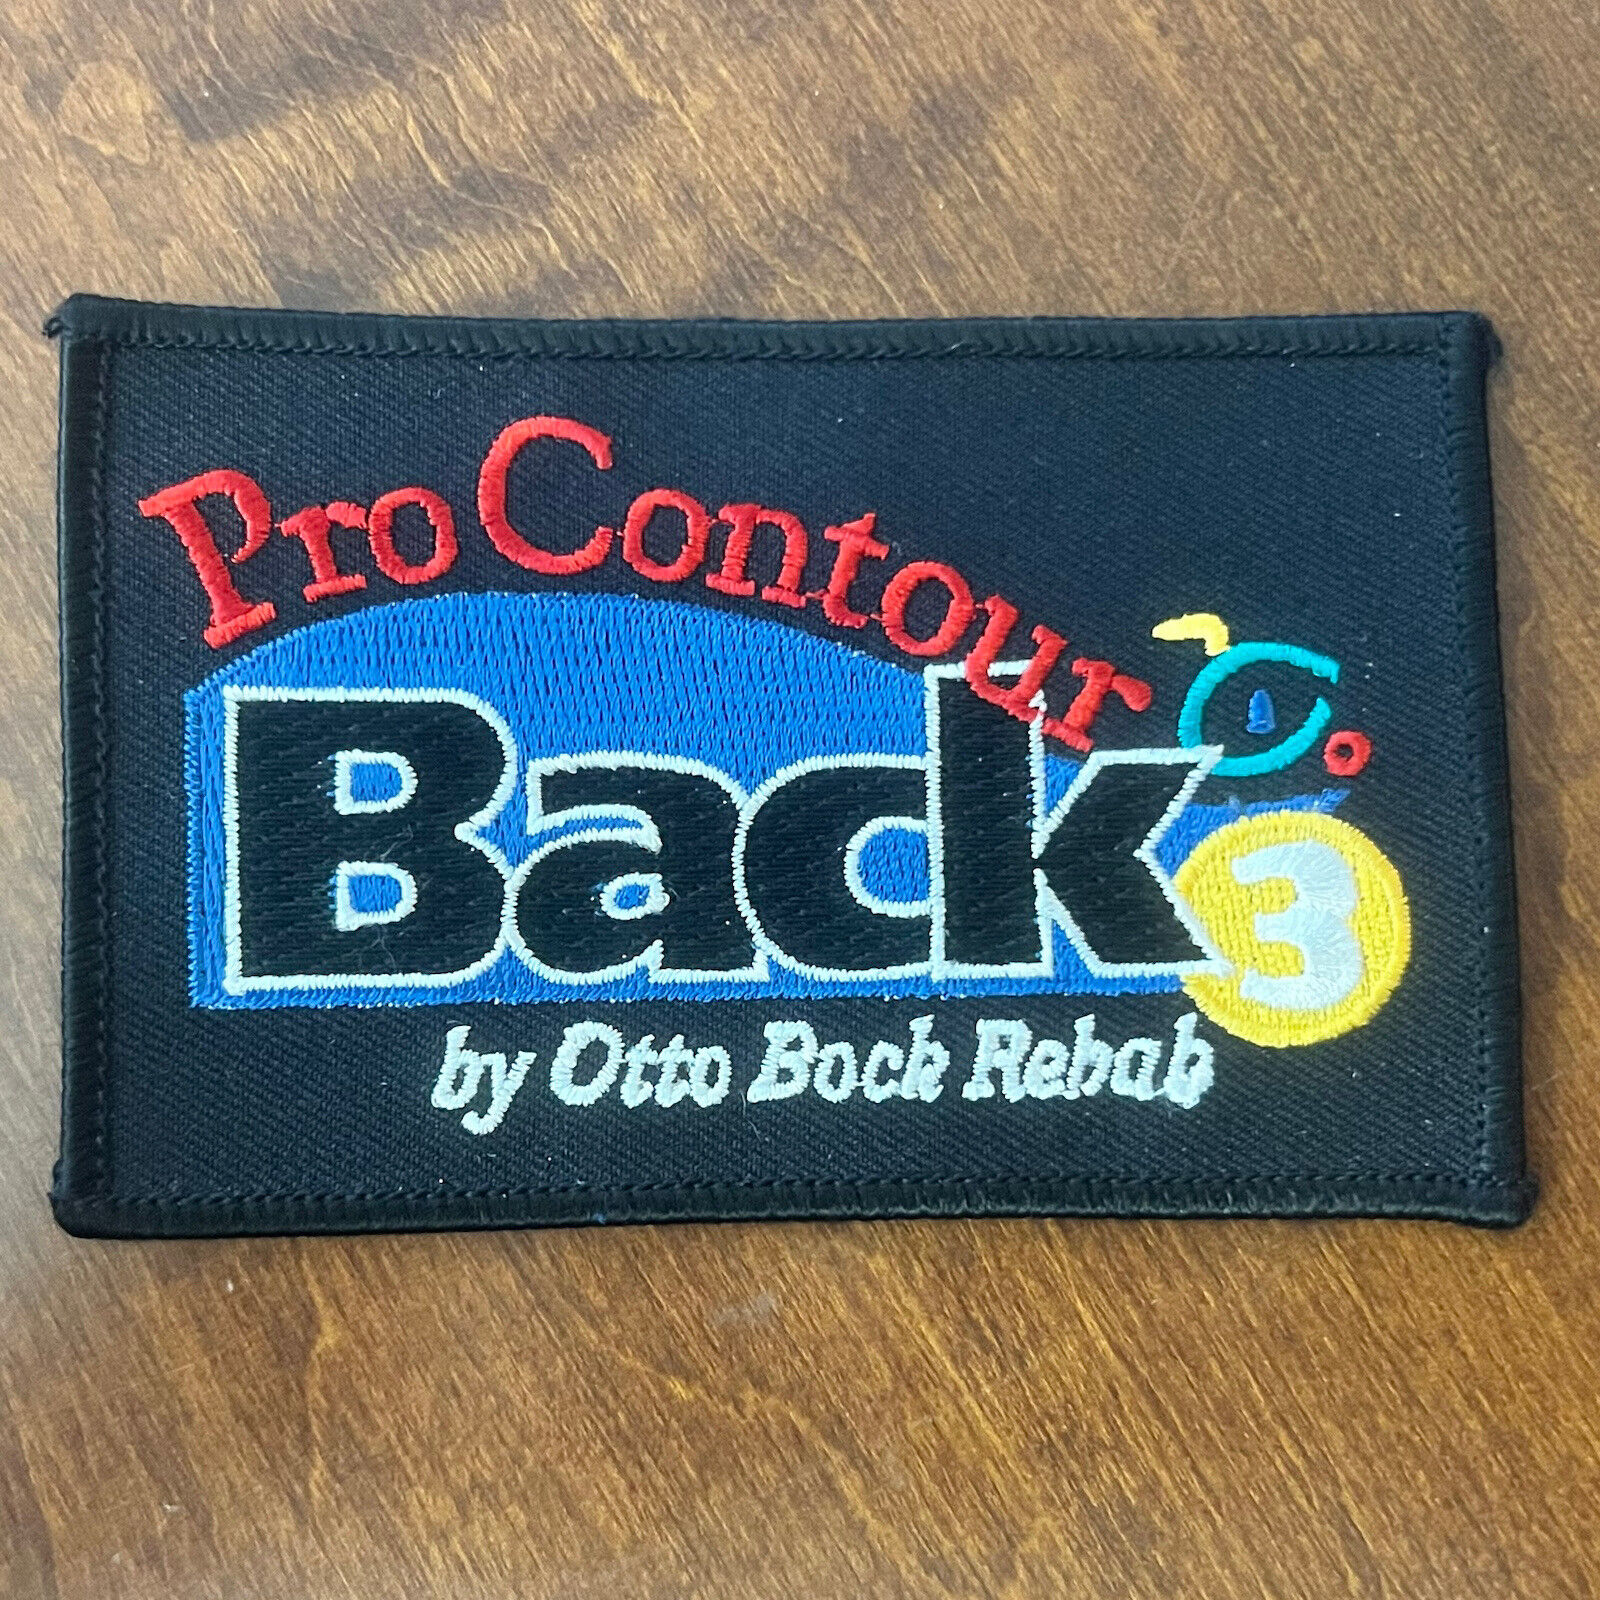 Pro Contour Back Patch - by Otto Bock Rehab